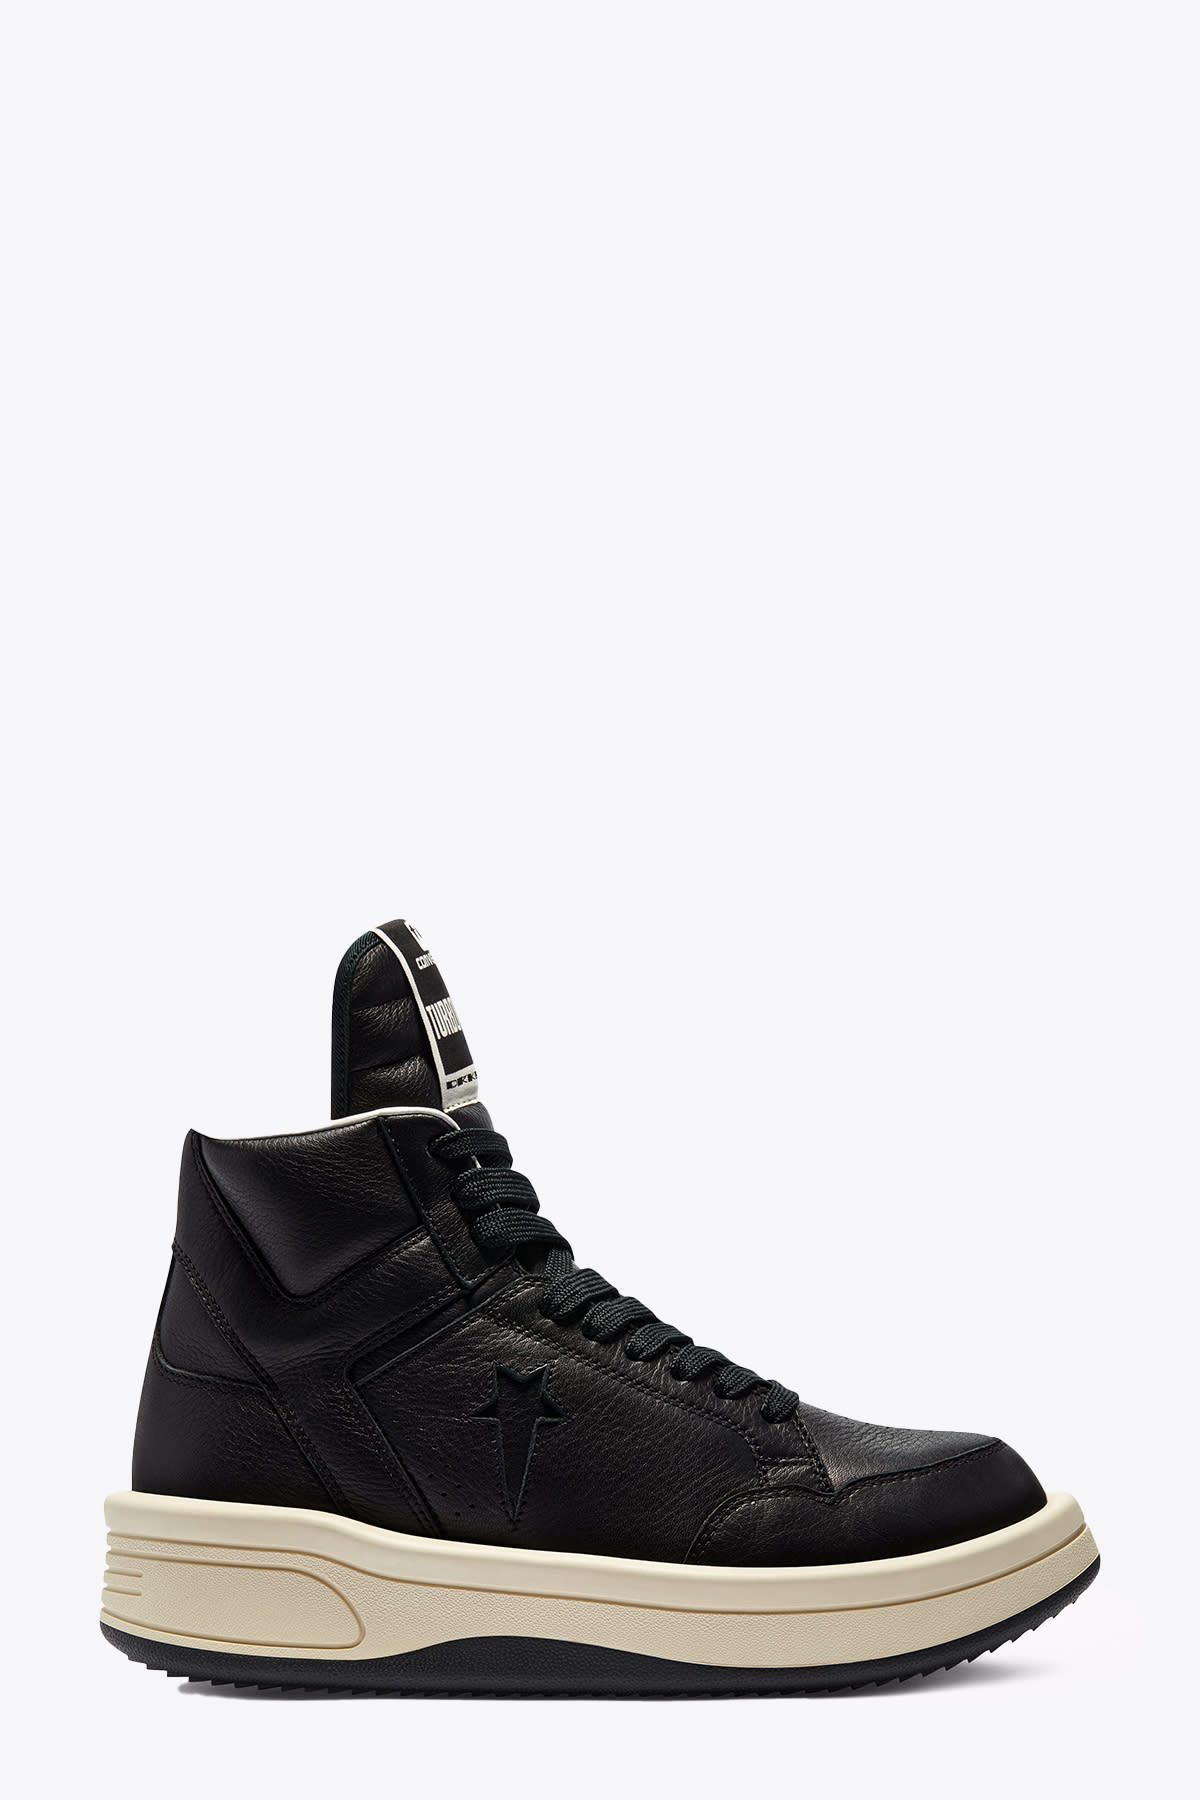 DRKSHDW Turbowpn Rick Owens x Converse official collaboration black sneaker - Turbo weapon